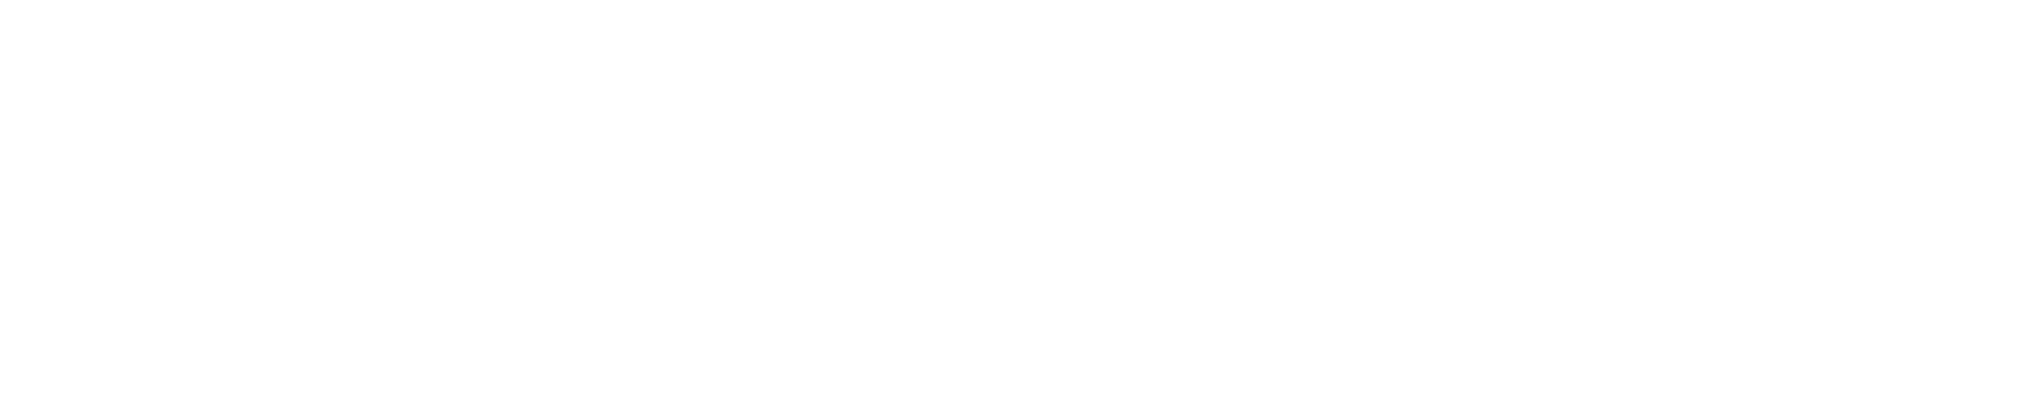 Mineral Resource